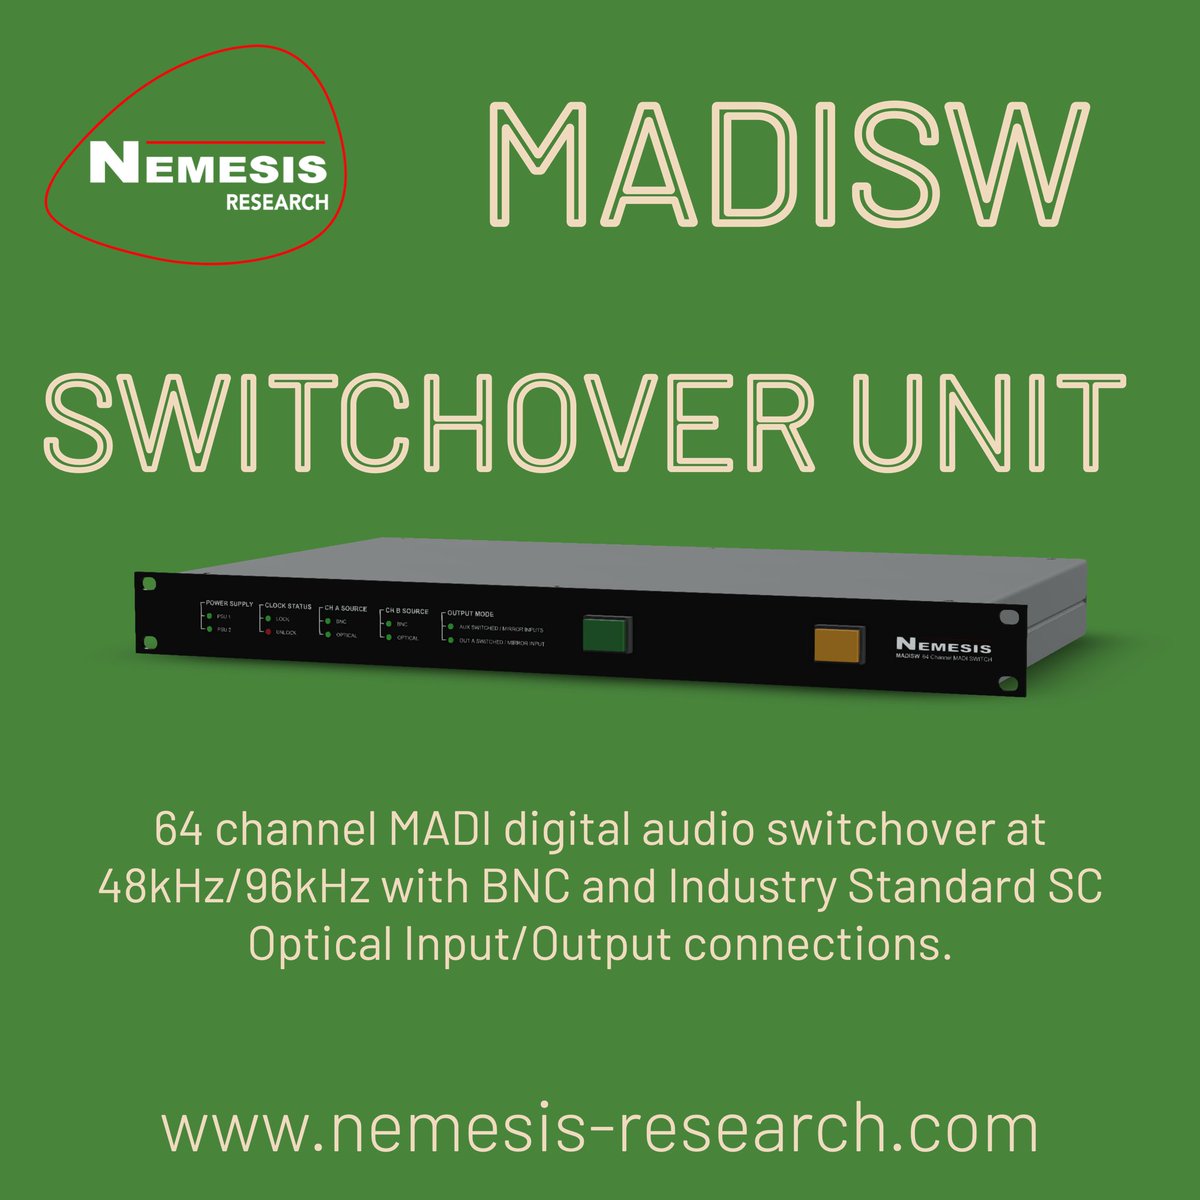 The Nemesis MADISW 64 channel digital audio switchover unit is a reliable way to switch between two MADI sound sources.

More info here:- nemesis-research.com/madisw

#NemesisResearch #ShowControl #ProductionTools #BackupSolutions